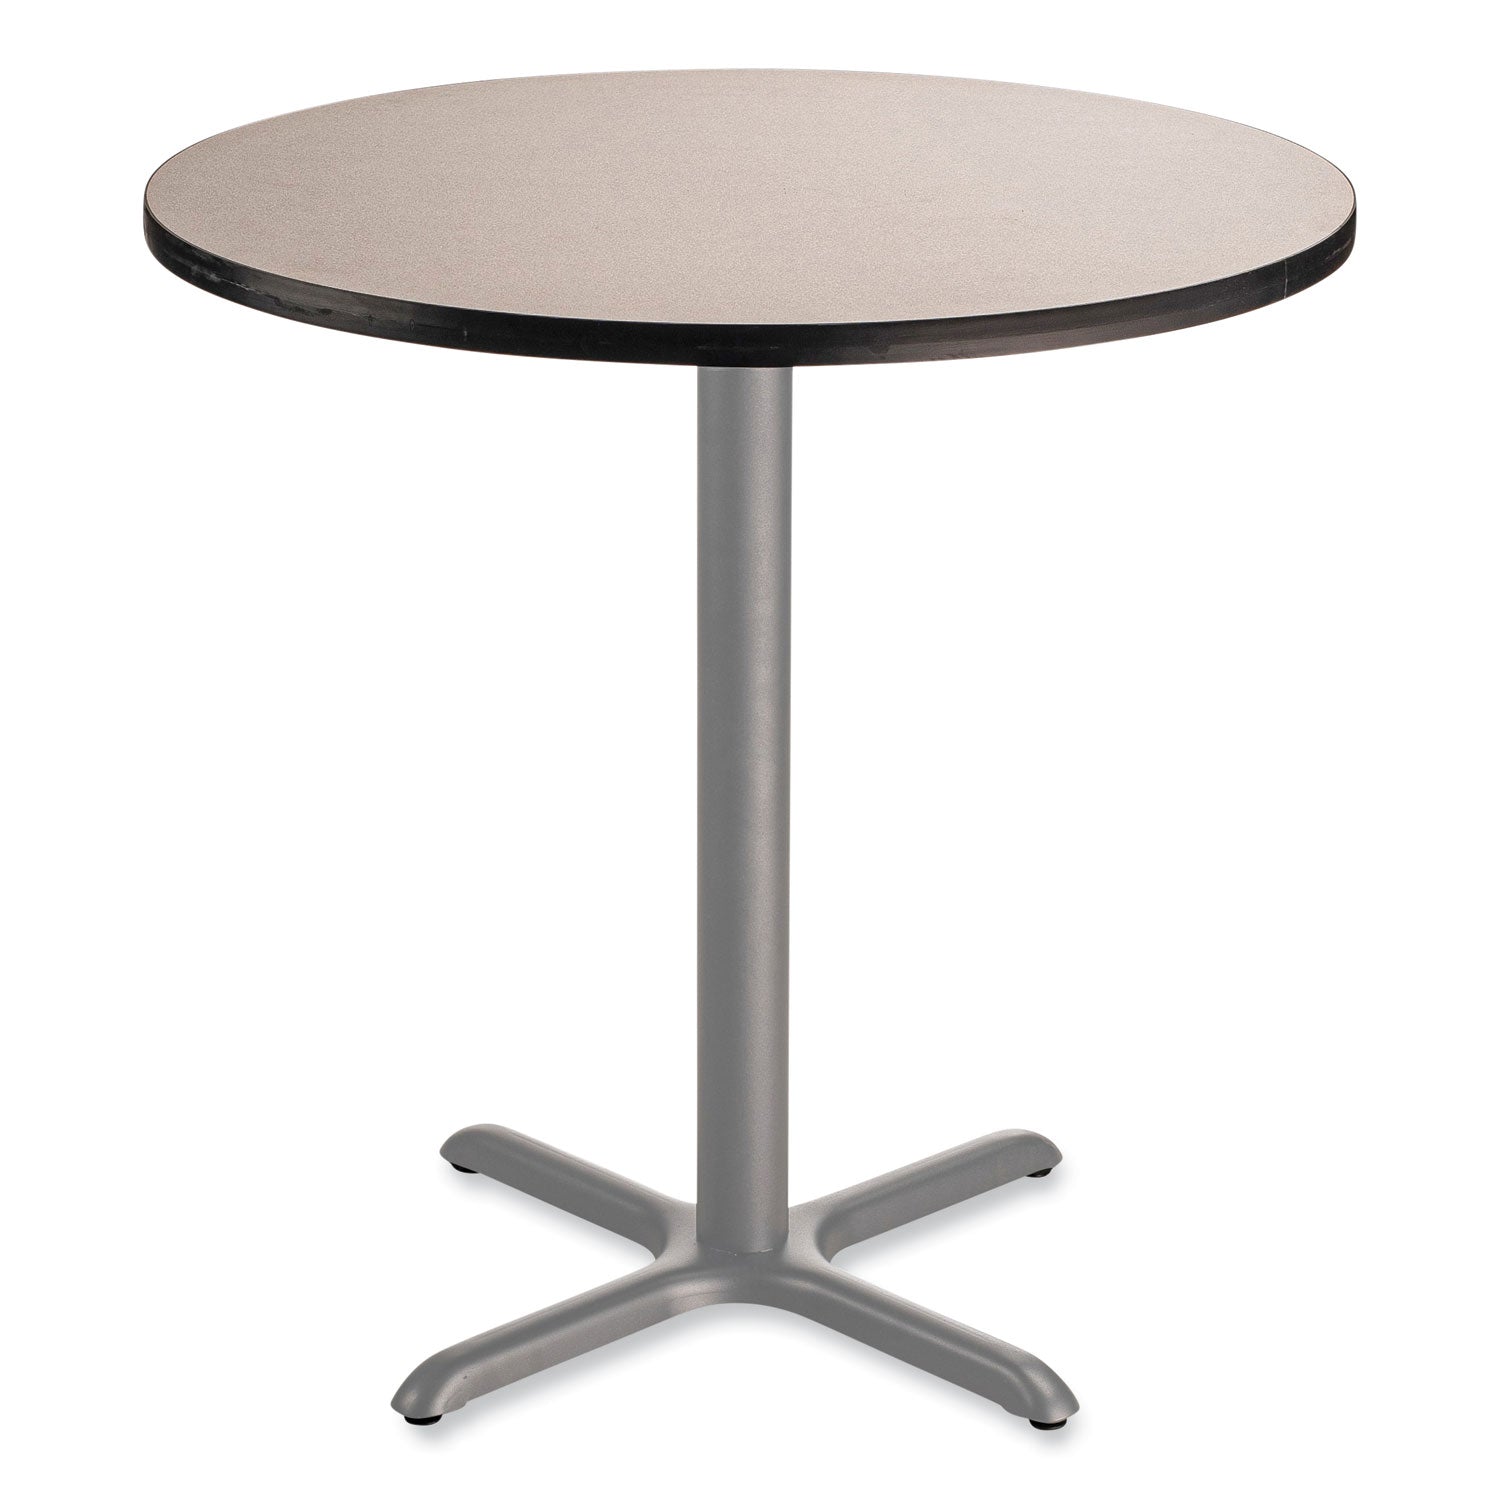 cafe-table-36-diameter-x-36h-round-top-x-base-gray-nebula-top-gray-base-ships-in-7-10-business-days_npscg13636xc1gy - 1